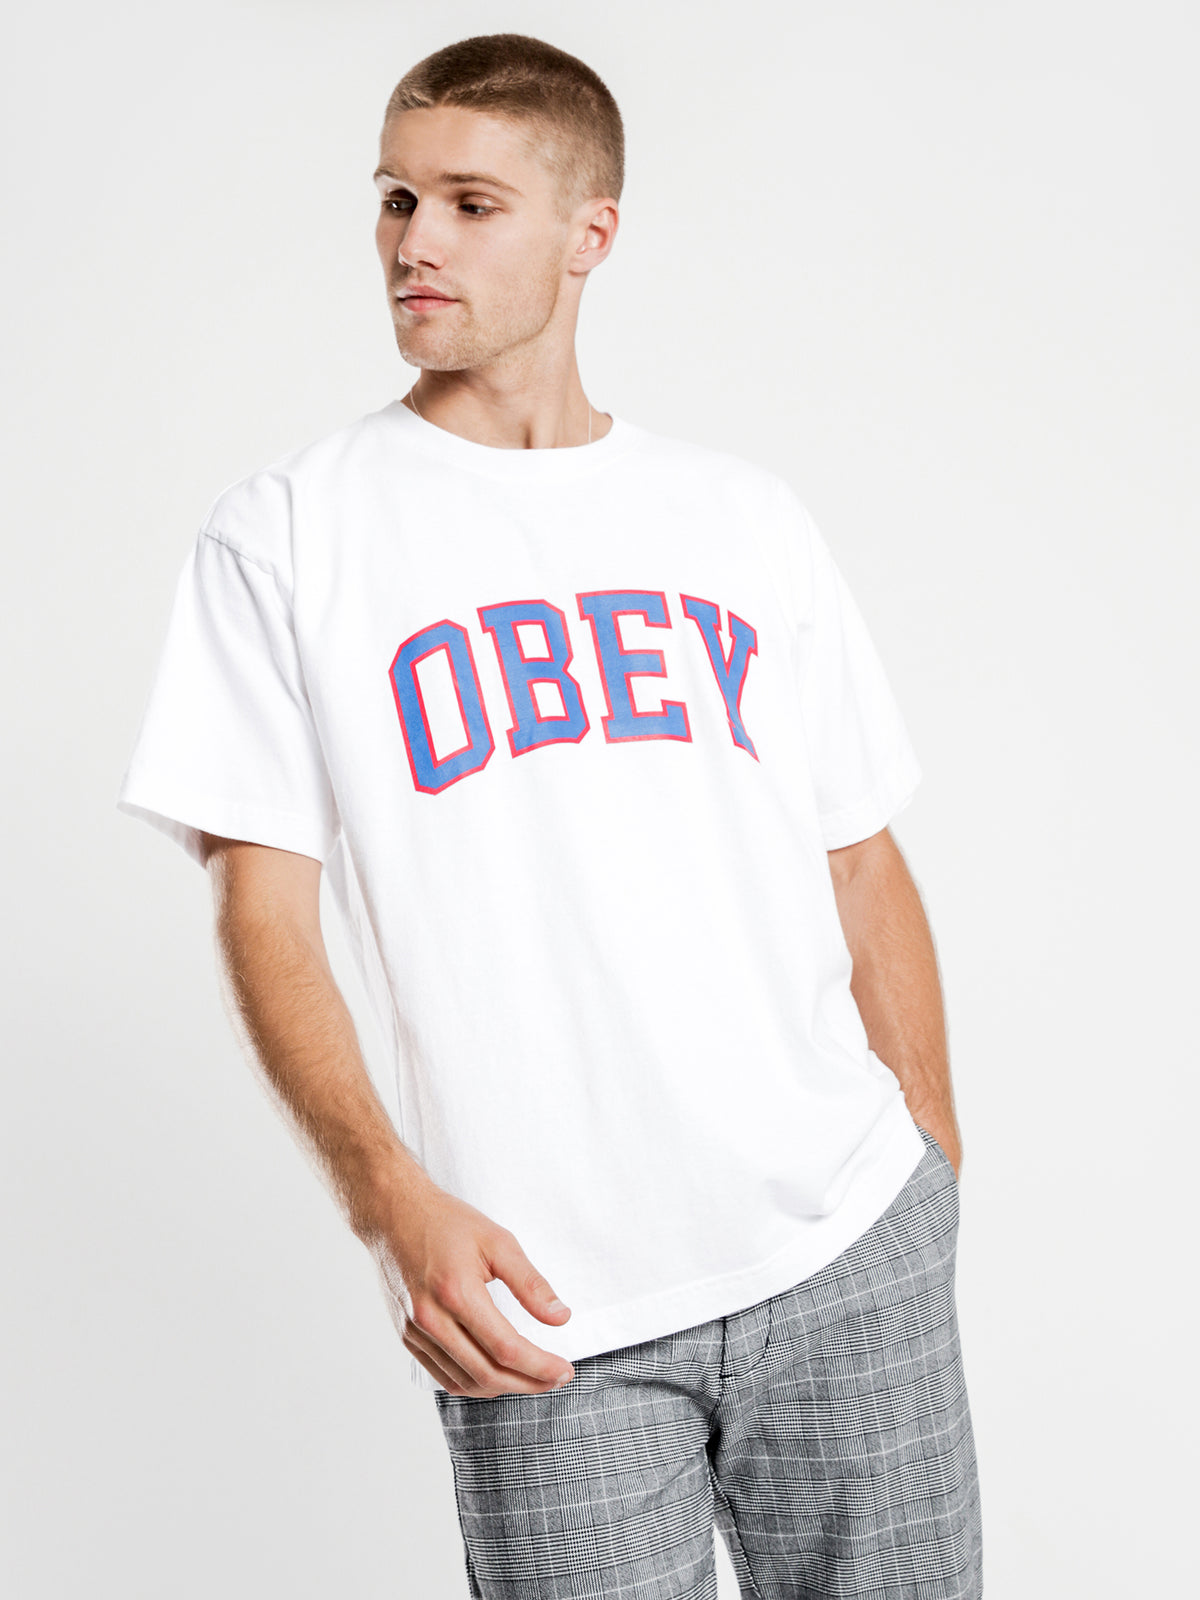 Obey Academic T-Shirt in White